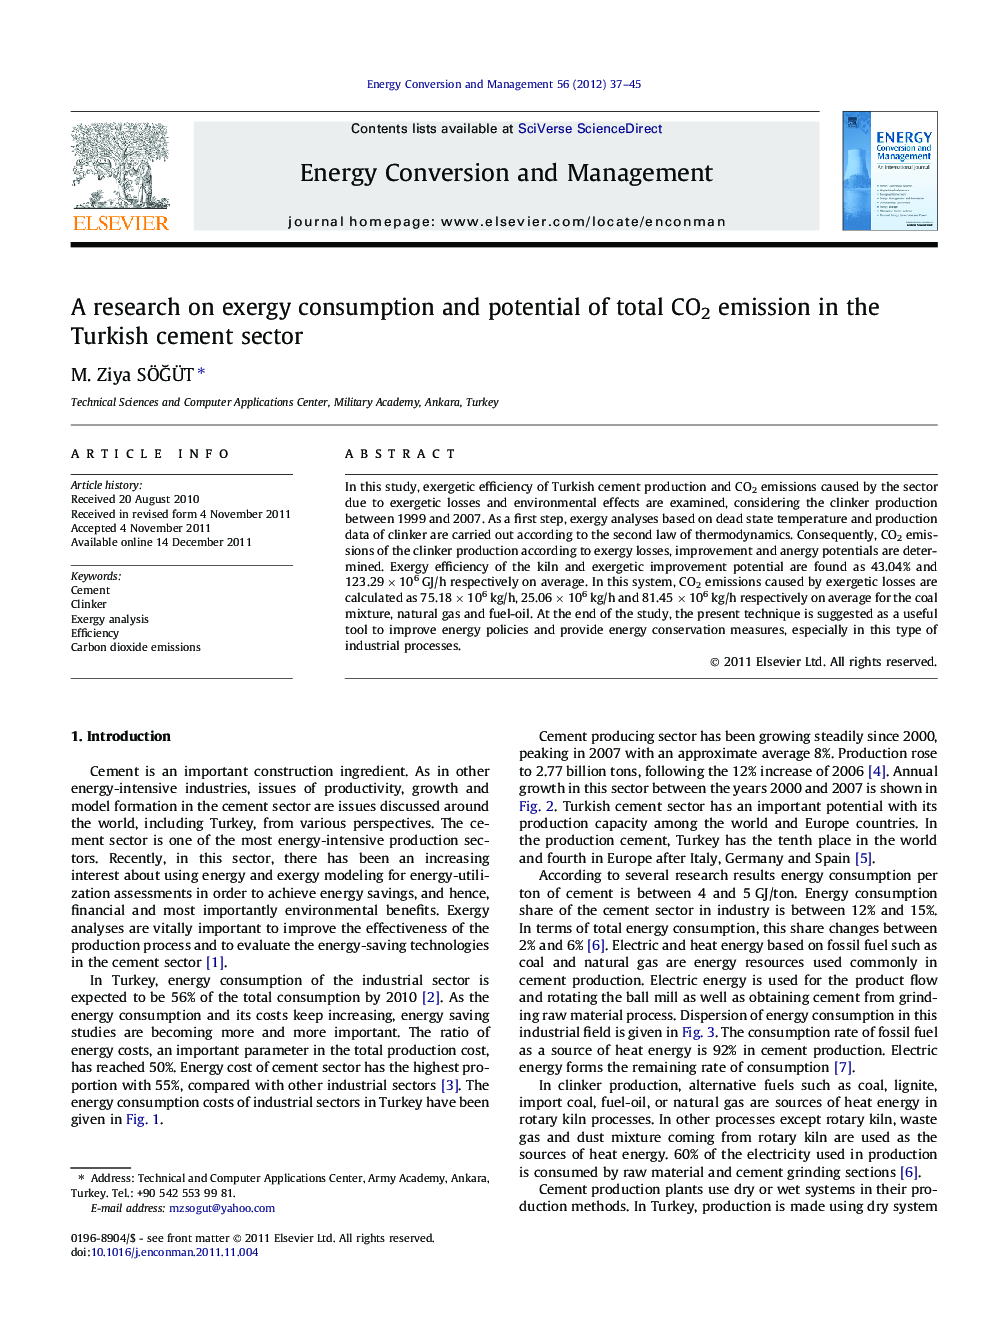 A research on exergy consumption and potential of total CO2 emission in the Turkish cement sector